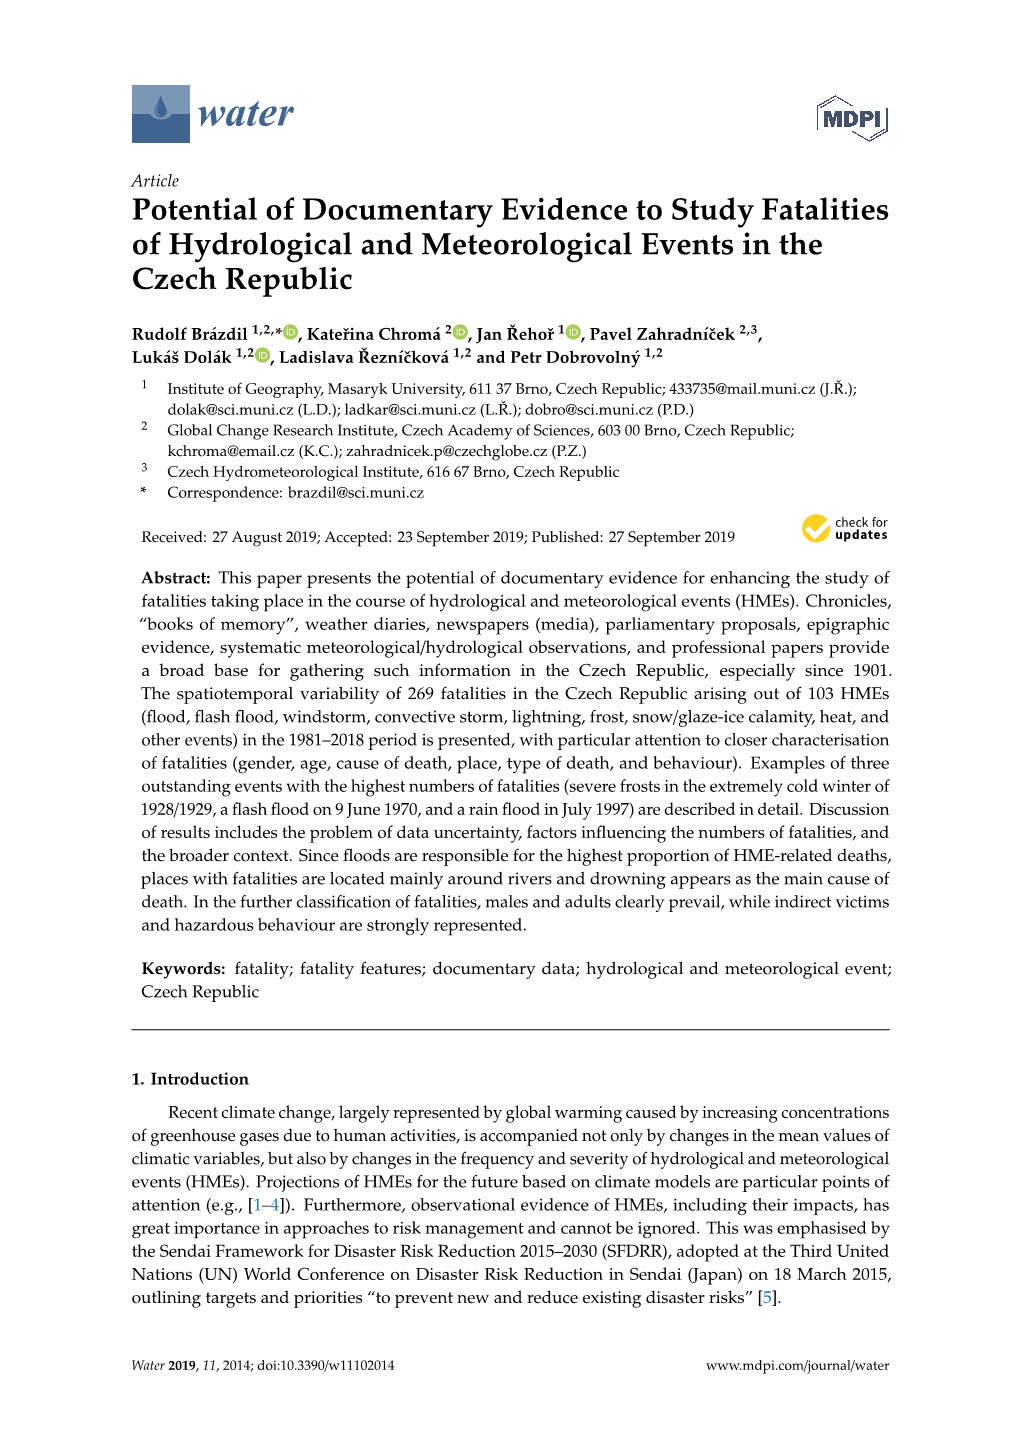 Potential of Documentary Evidence to Study Fatalities of Hydrological and Meteorological Events in the Czech Republic